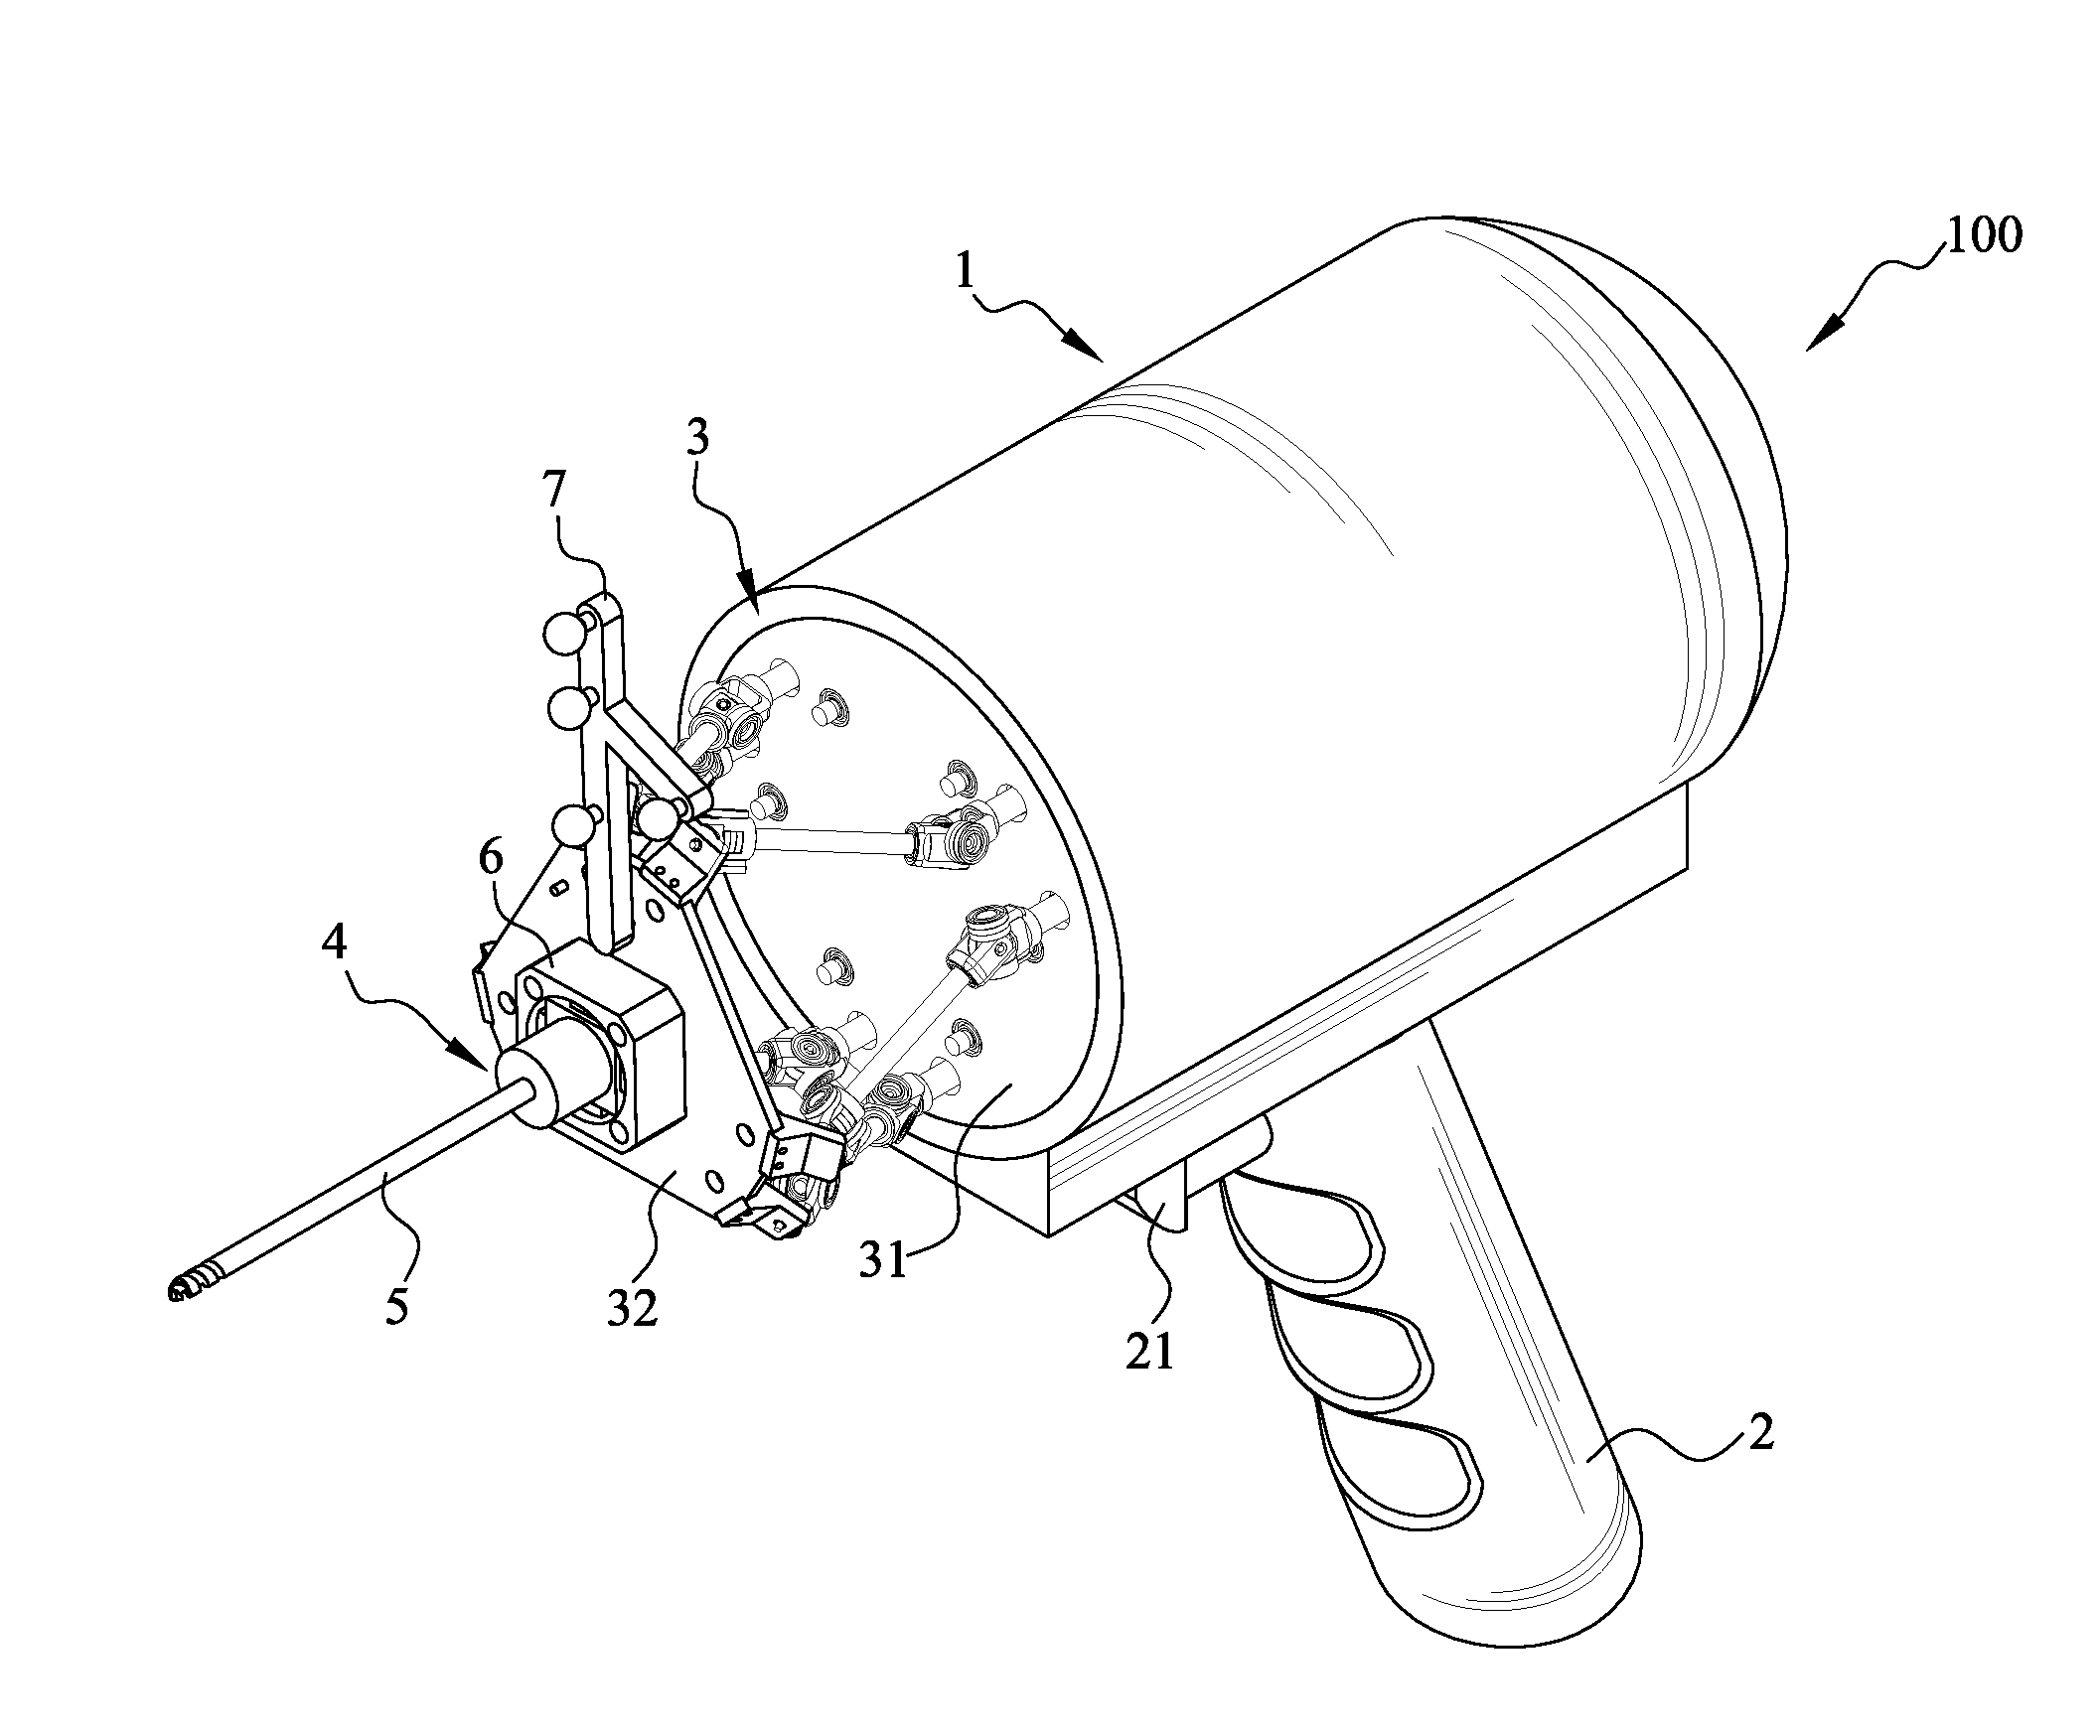 Handheld robot for orthopedic surgery and control method thereof